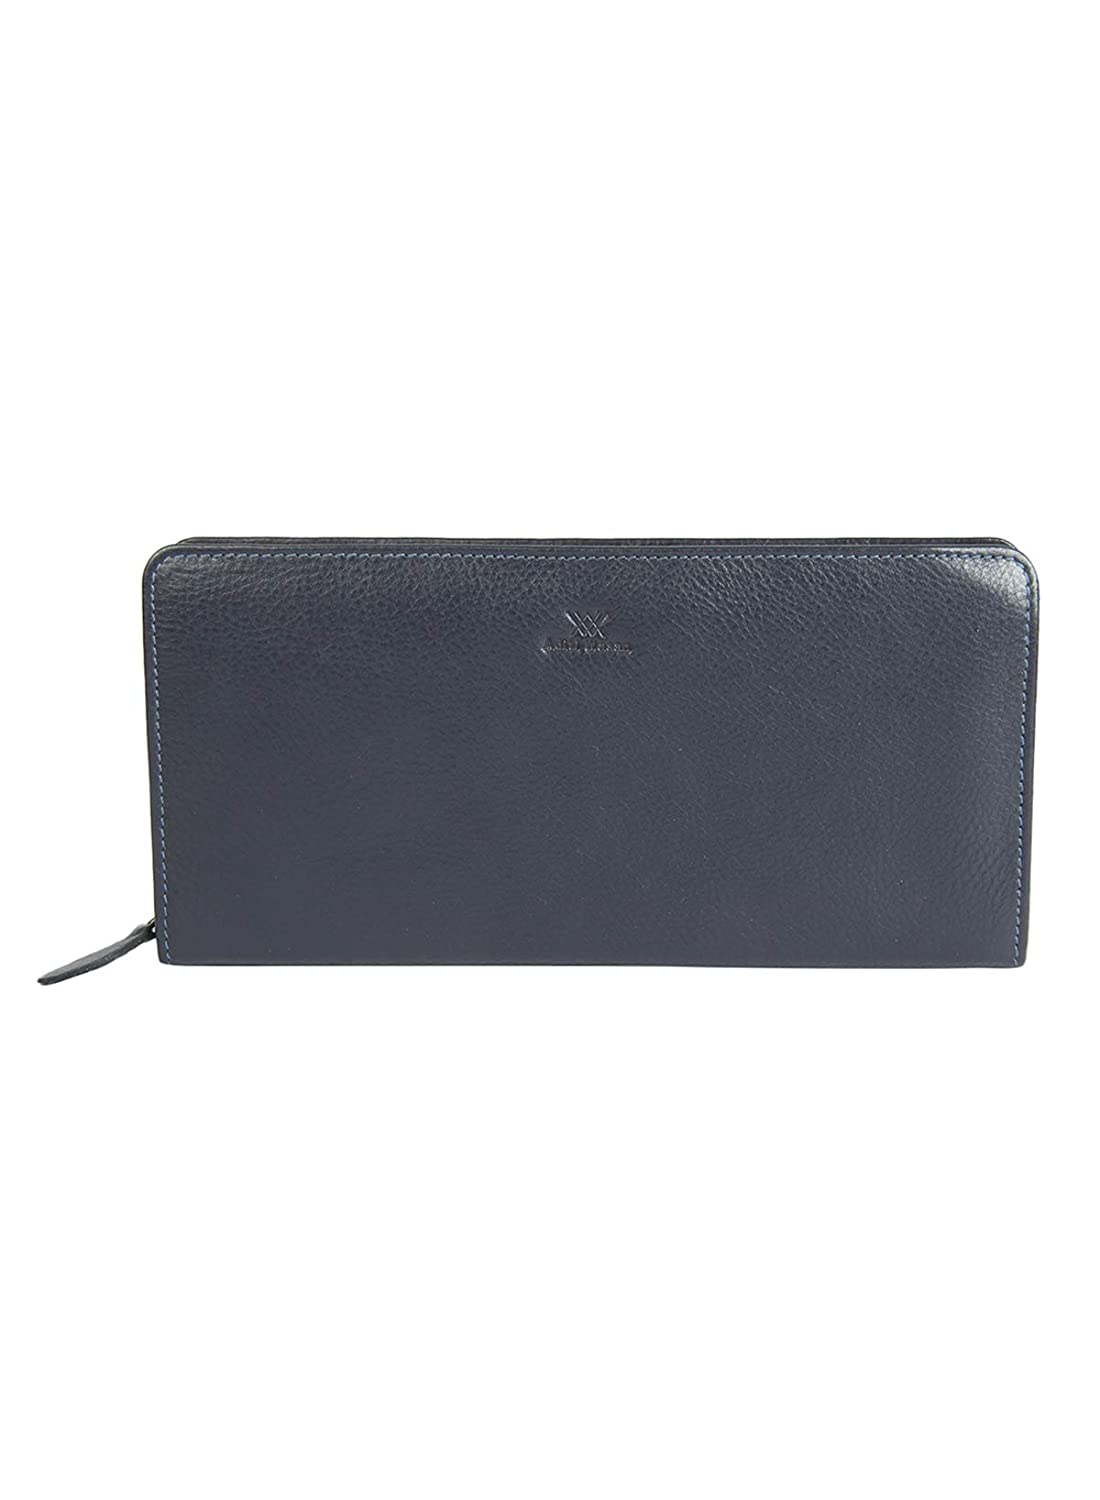 genuine leather blue gusset clutch